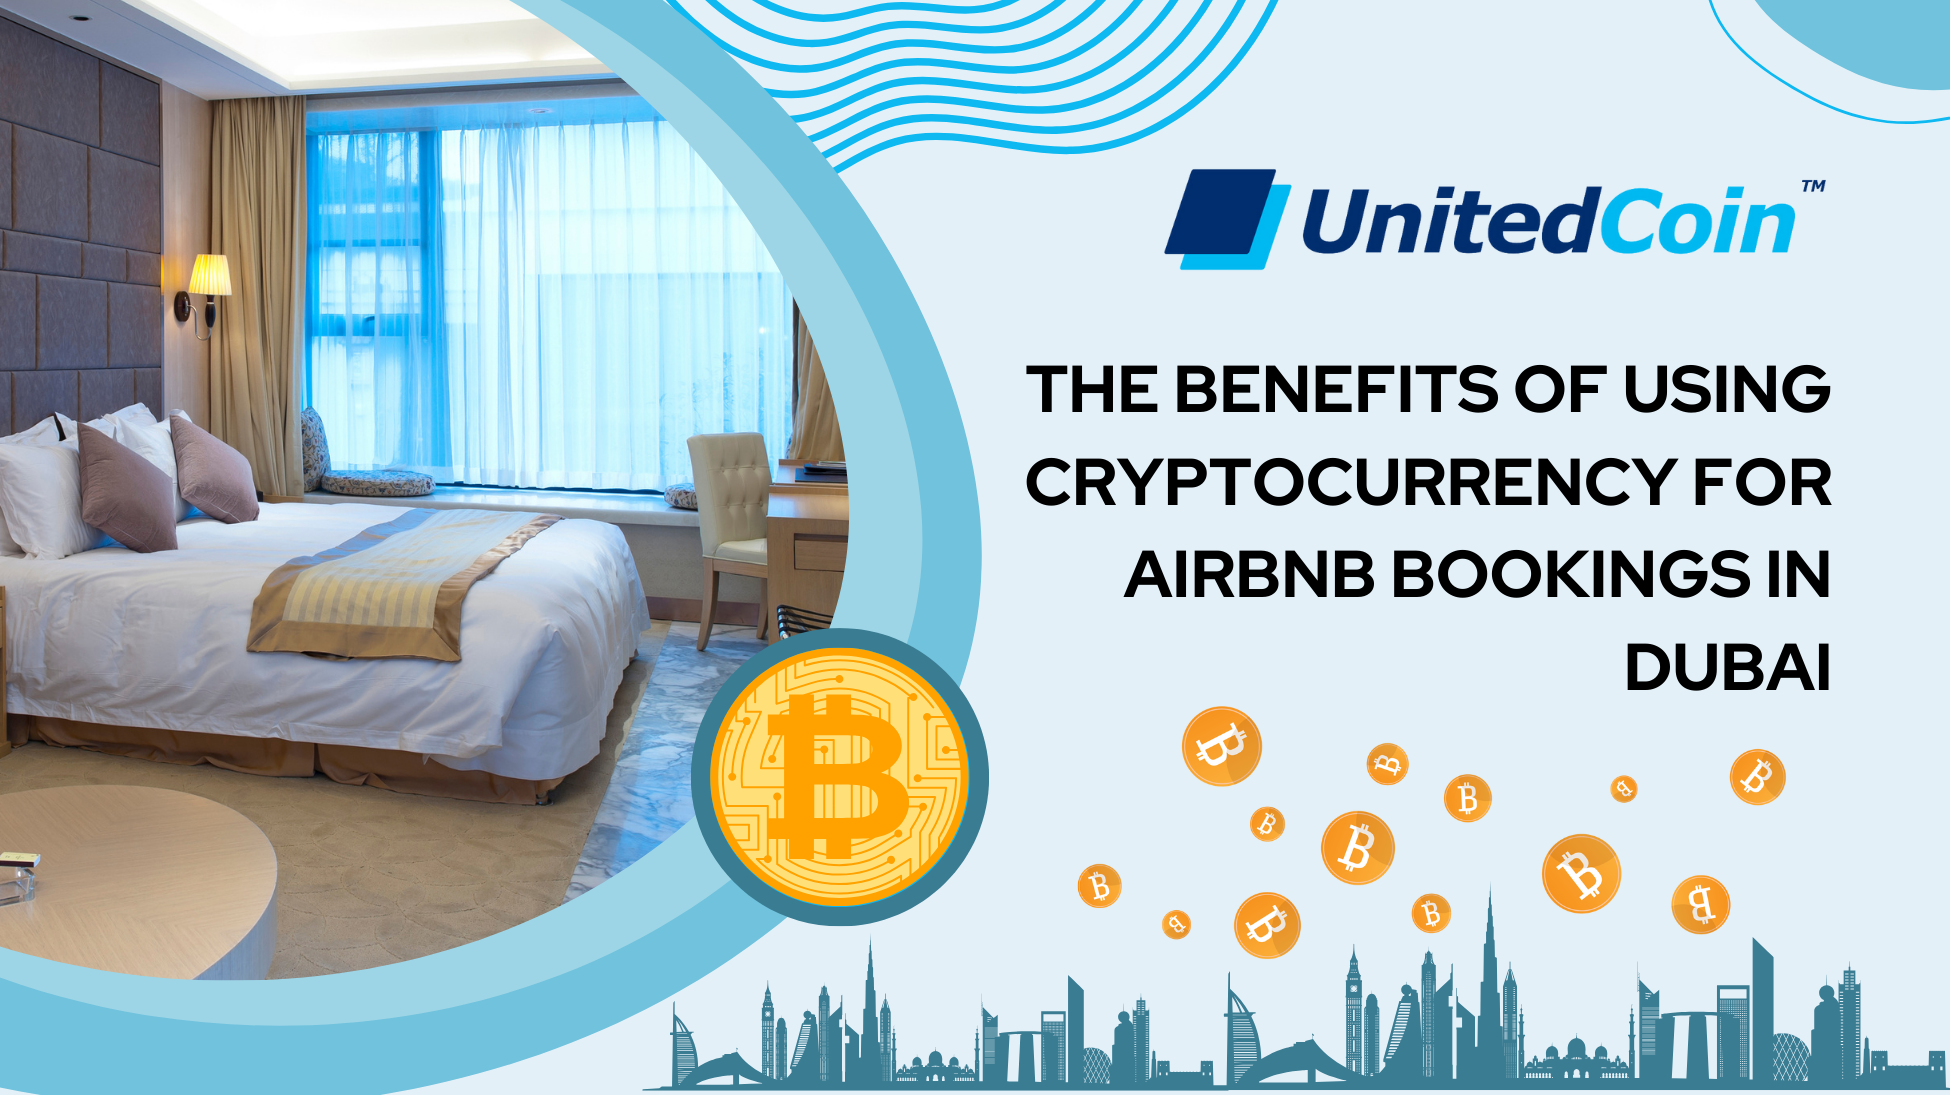 The Benefits of Using Cryptocurrency for Airbnb Bookings in Dubai - UAEToday News